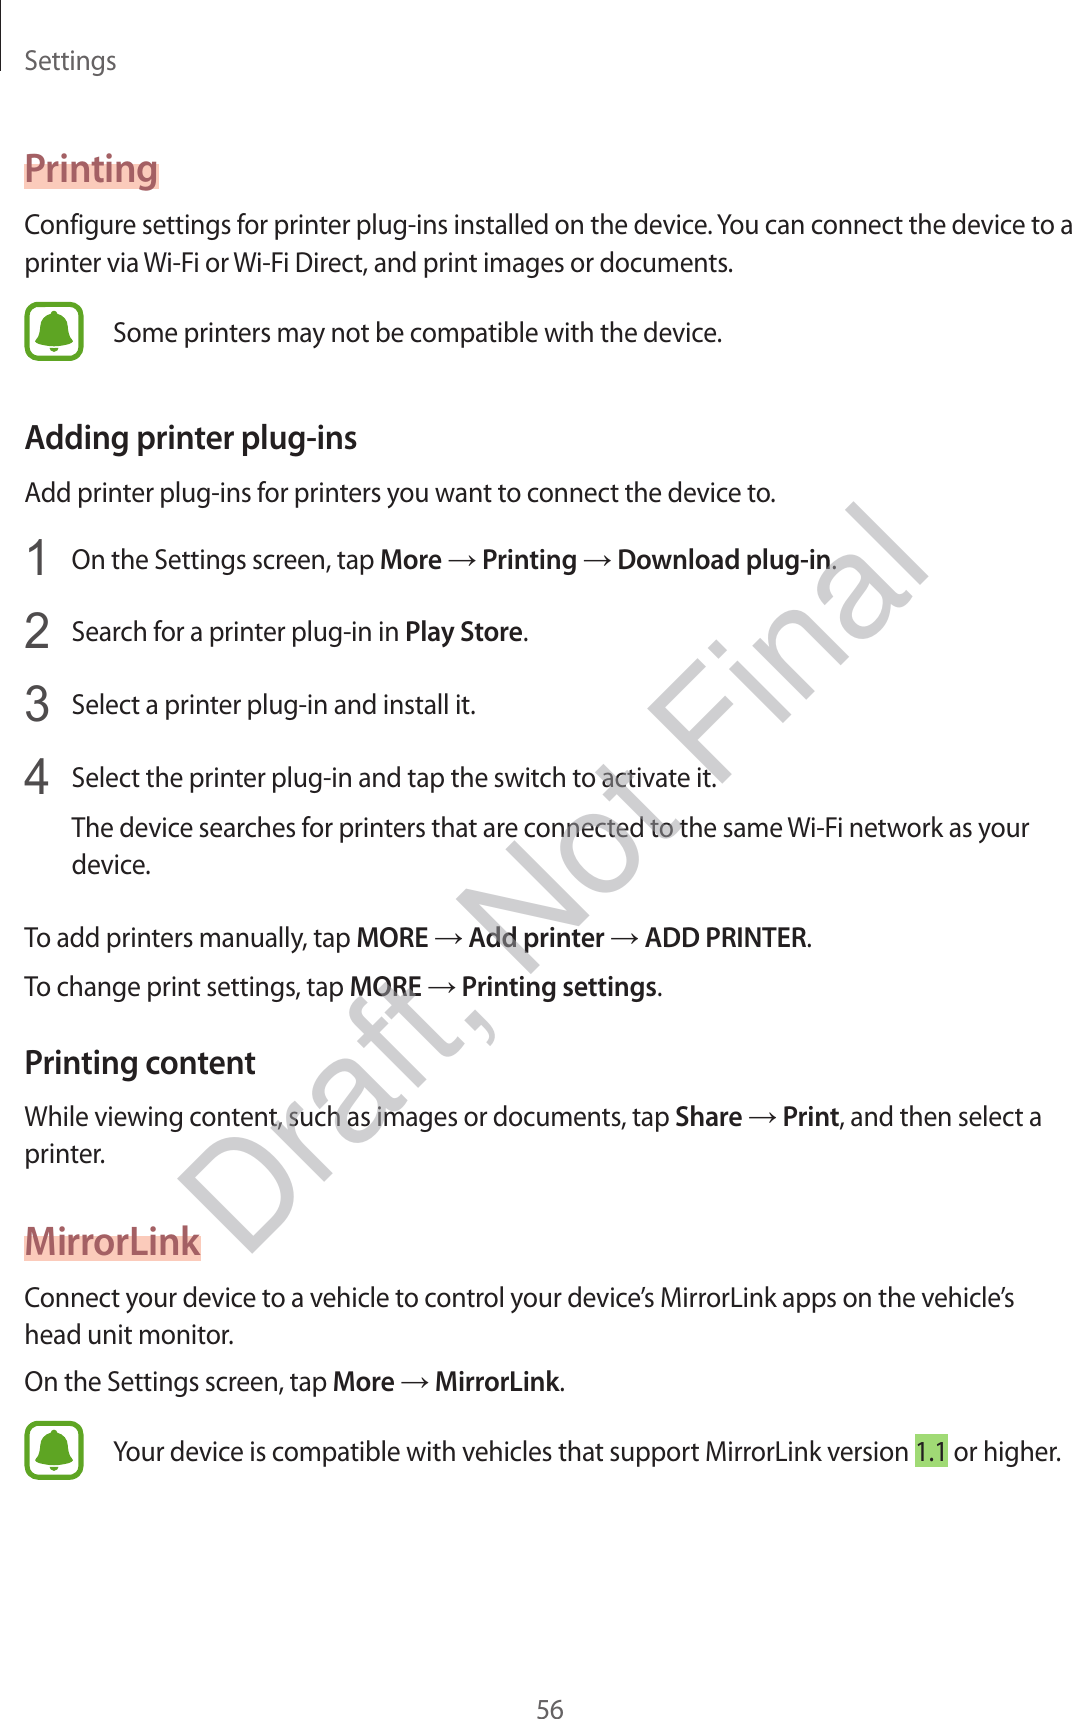 Settings56PrintingConfigure settings for printer plug-ins installed on the device. You can connect the device to a printer via Wi-Fi or Wi-Fi Direct, and print images or documents.Some printers may not be compatible with the device.Adding printer plug-insAdd printer plug-ins for printers you want to connect the device to.1  On the Settings screen, tap More → Printing → Download plug-in.2  Search for a printer plug-in in Play Store.3  Select a printer plug-in and install it.4  Select the printer plug-in and tap the switch to activate it.The device searches for printers that are connected to the same Wi-Fi network as your device.To add printers manually, tap MORE → Add printer → ADD PRINTER.To change print settings, tap MORE → Printing settings.Printing contentWhile viewing content, such as images or documents, tap Share → Print, and then select a printer.MirrorLinkConnect your device to a vehicle to control your device’s MirrorLink apps on the vehicle’s head unit monitor.On the Settings screen, tap More → MirrorLink.Your device is compatible with vehicles that support MirrorLink version 1.1 or higher.Draft, Not Final